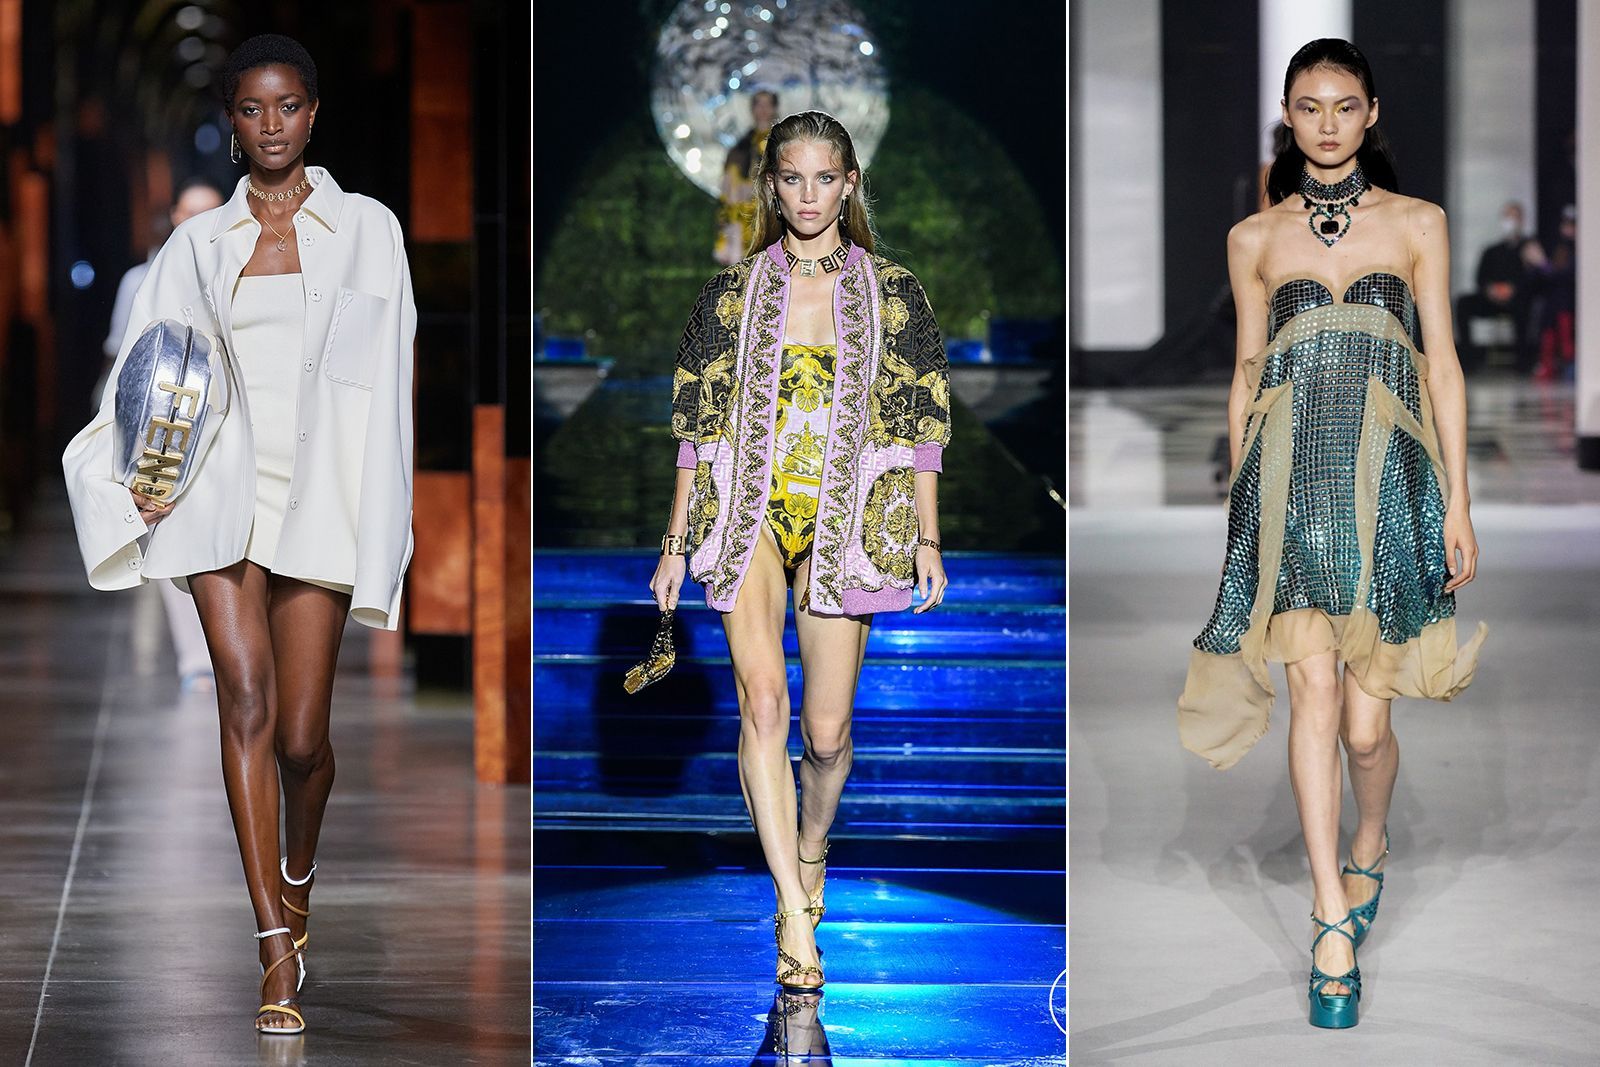 Examples of chokers worn on the catwalks for SS22, including (from L-R) Fendi, Versace by Fendi and Lanvin